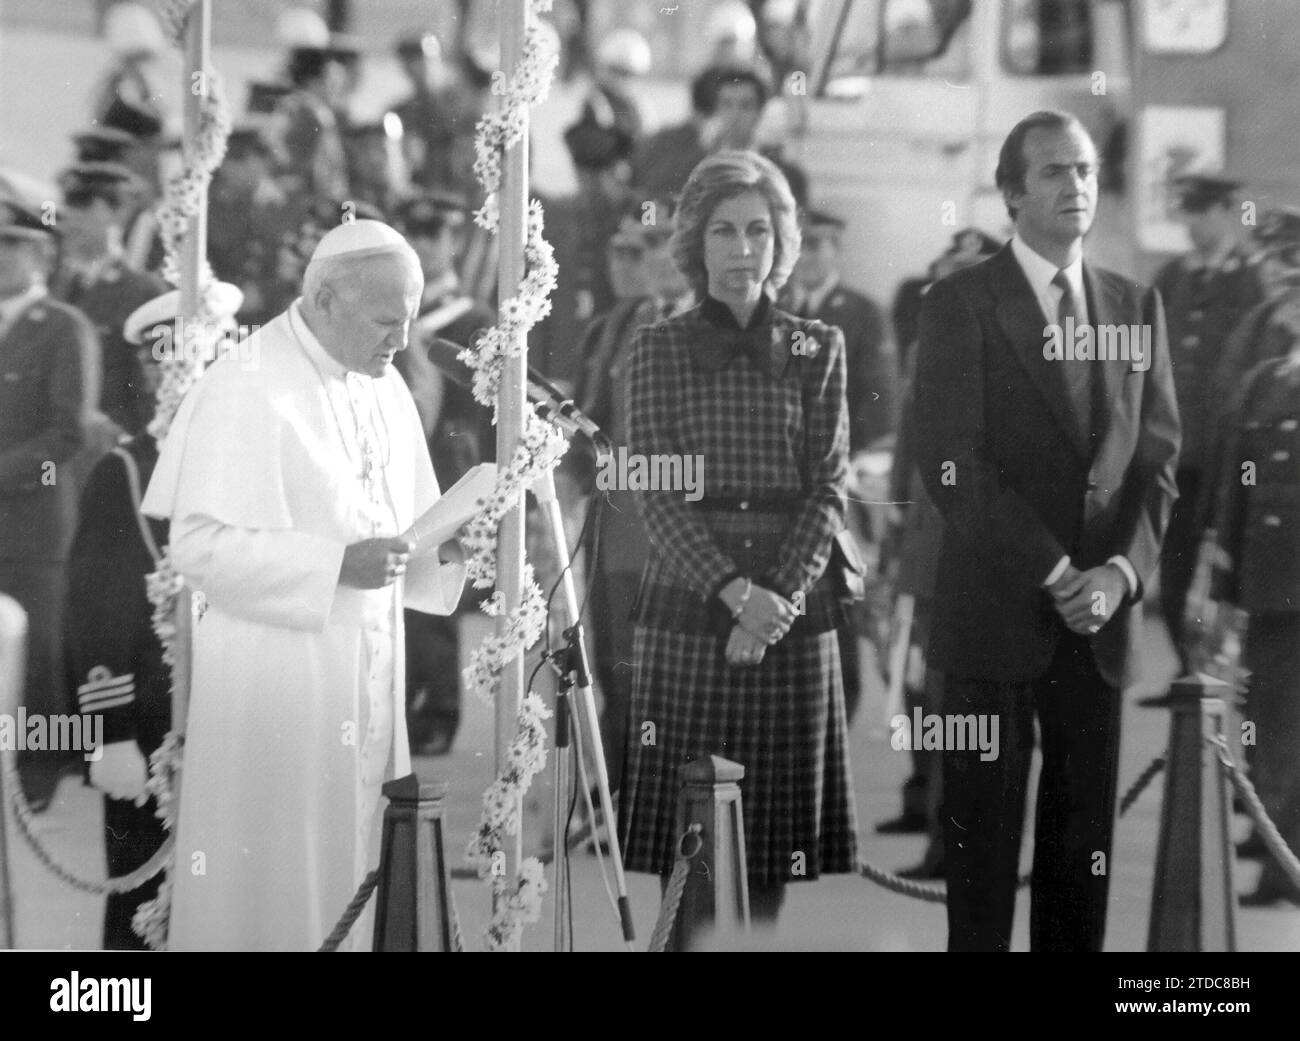 Madrid, 10/31/1982. John Paul II in Spain. In the image, SS speech upon arrival at Barajas Airport, with Kings Don Juan Carlos and Doña Sofía. Credit: Album / Archivo ABC / Manuel Sanz Bermejo Stock Photo